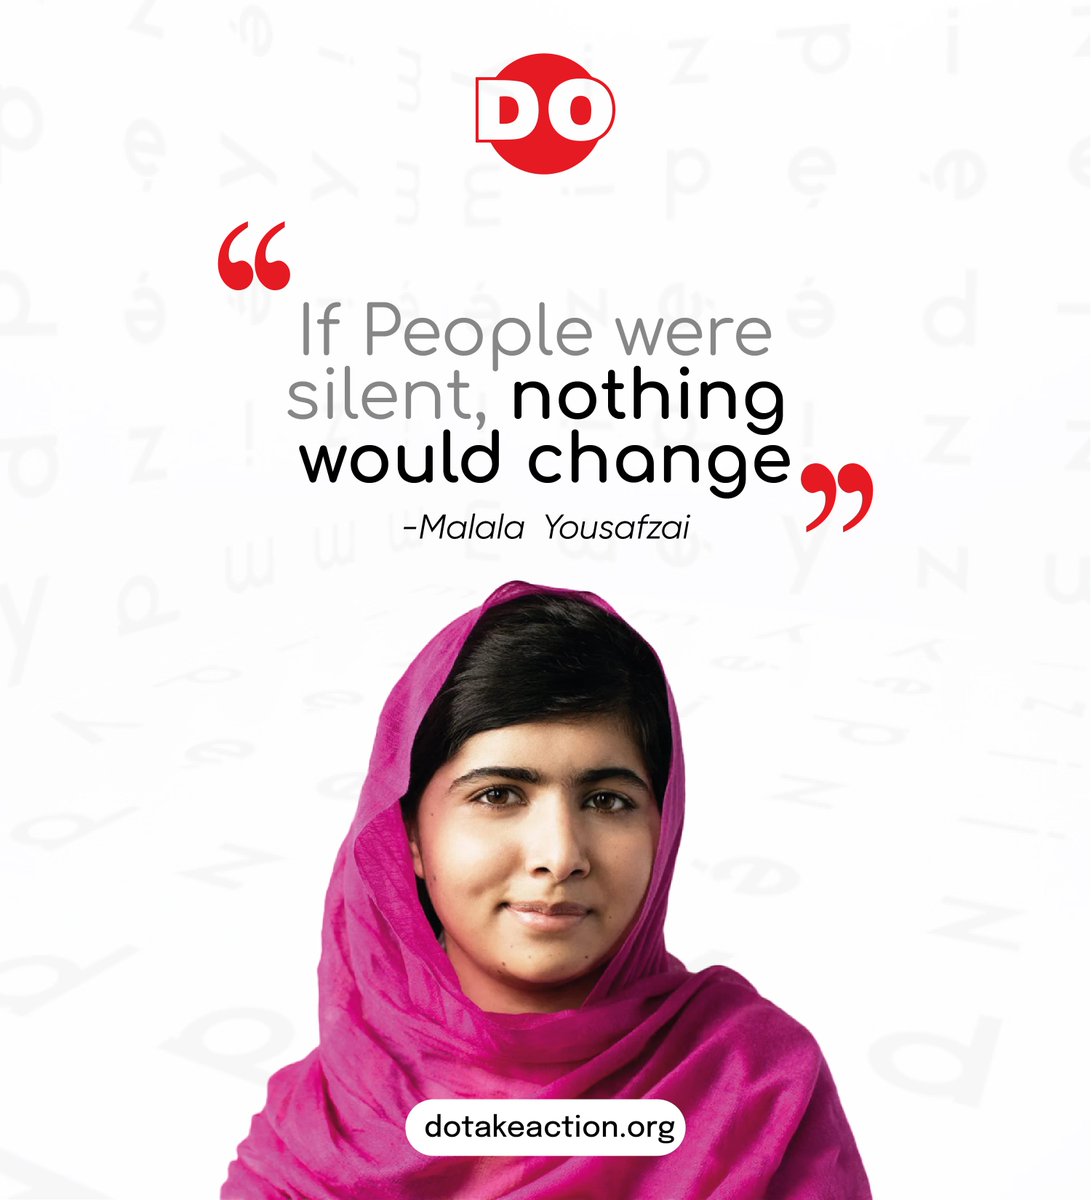 Don't be silent! Just like @malala  powerful voice sparked global change, your voice matters in your community. Together, speaking up and taking action can create a better world.

@Malala